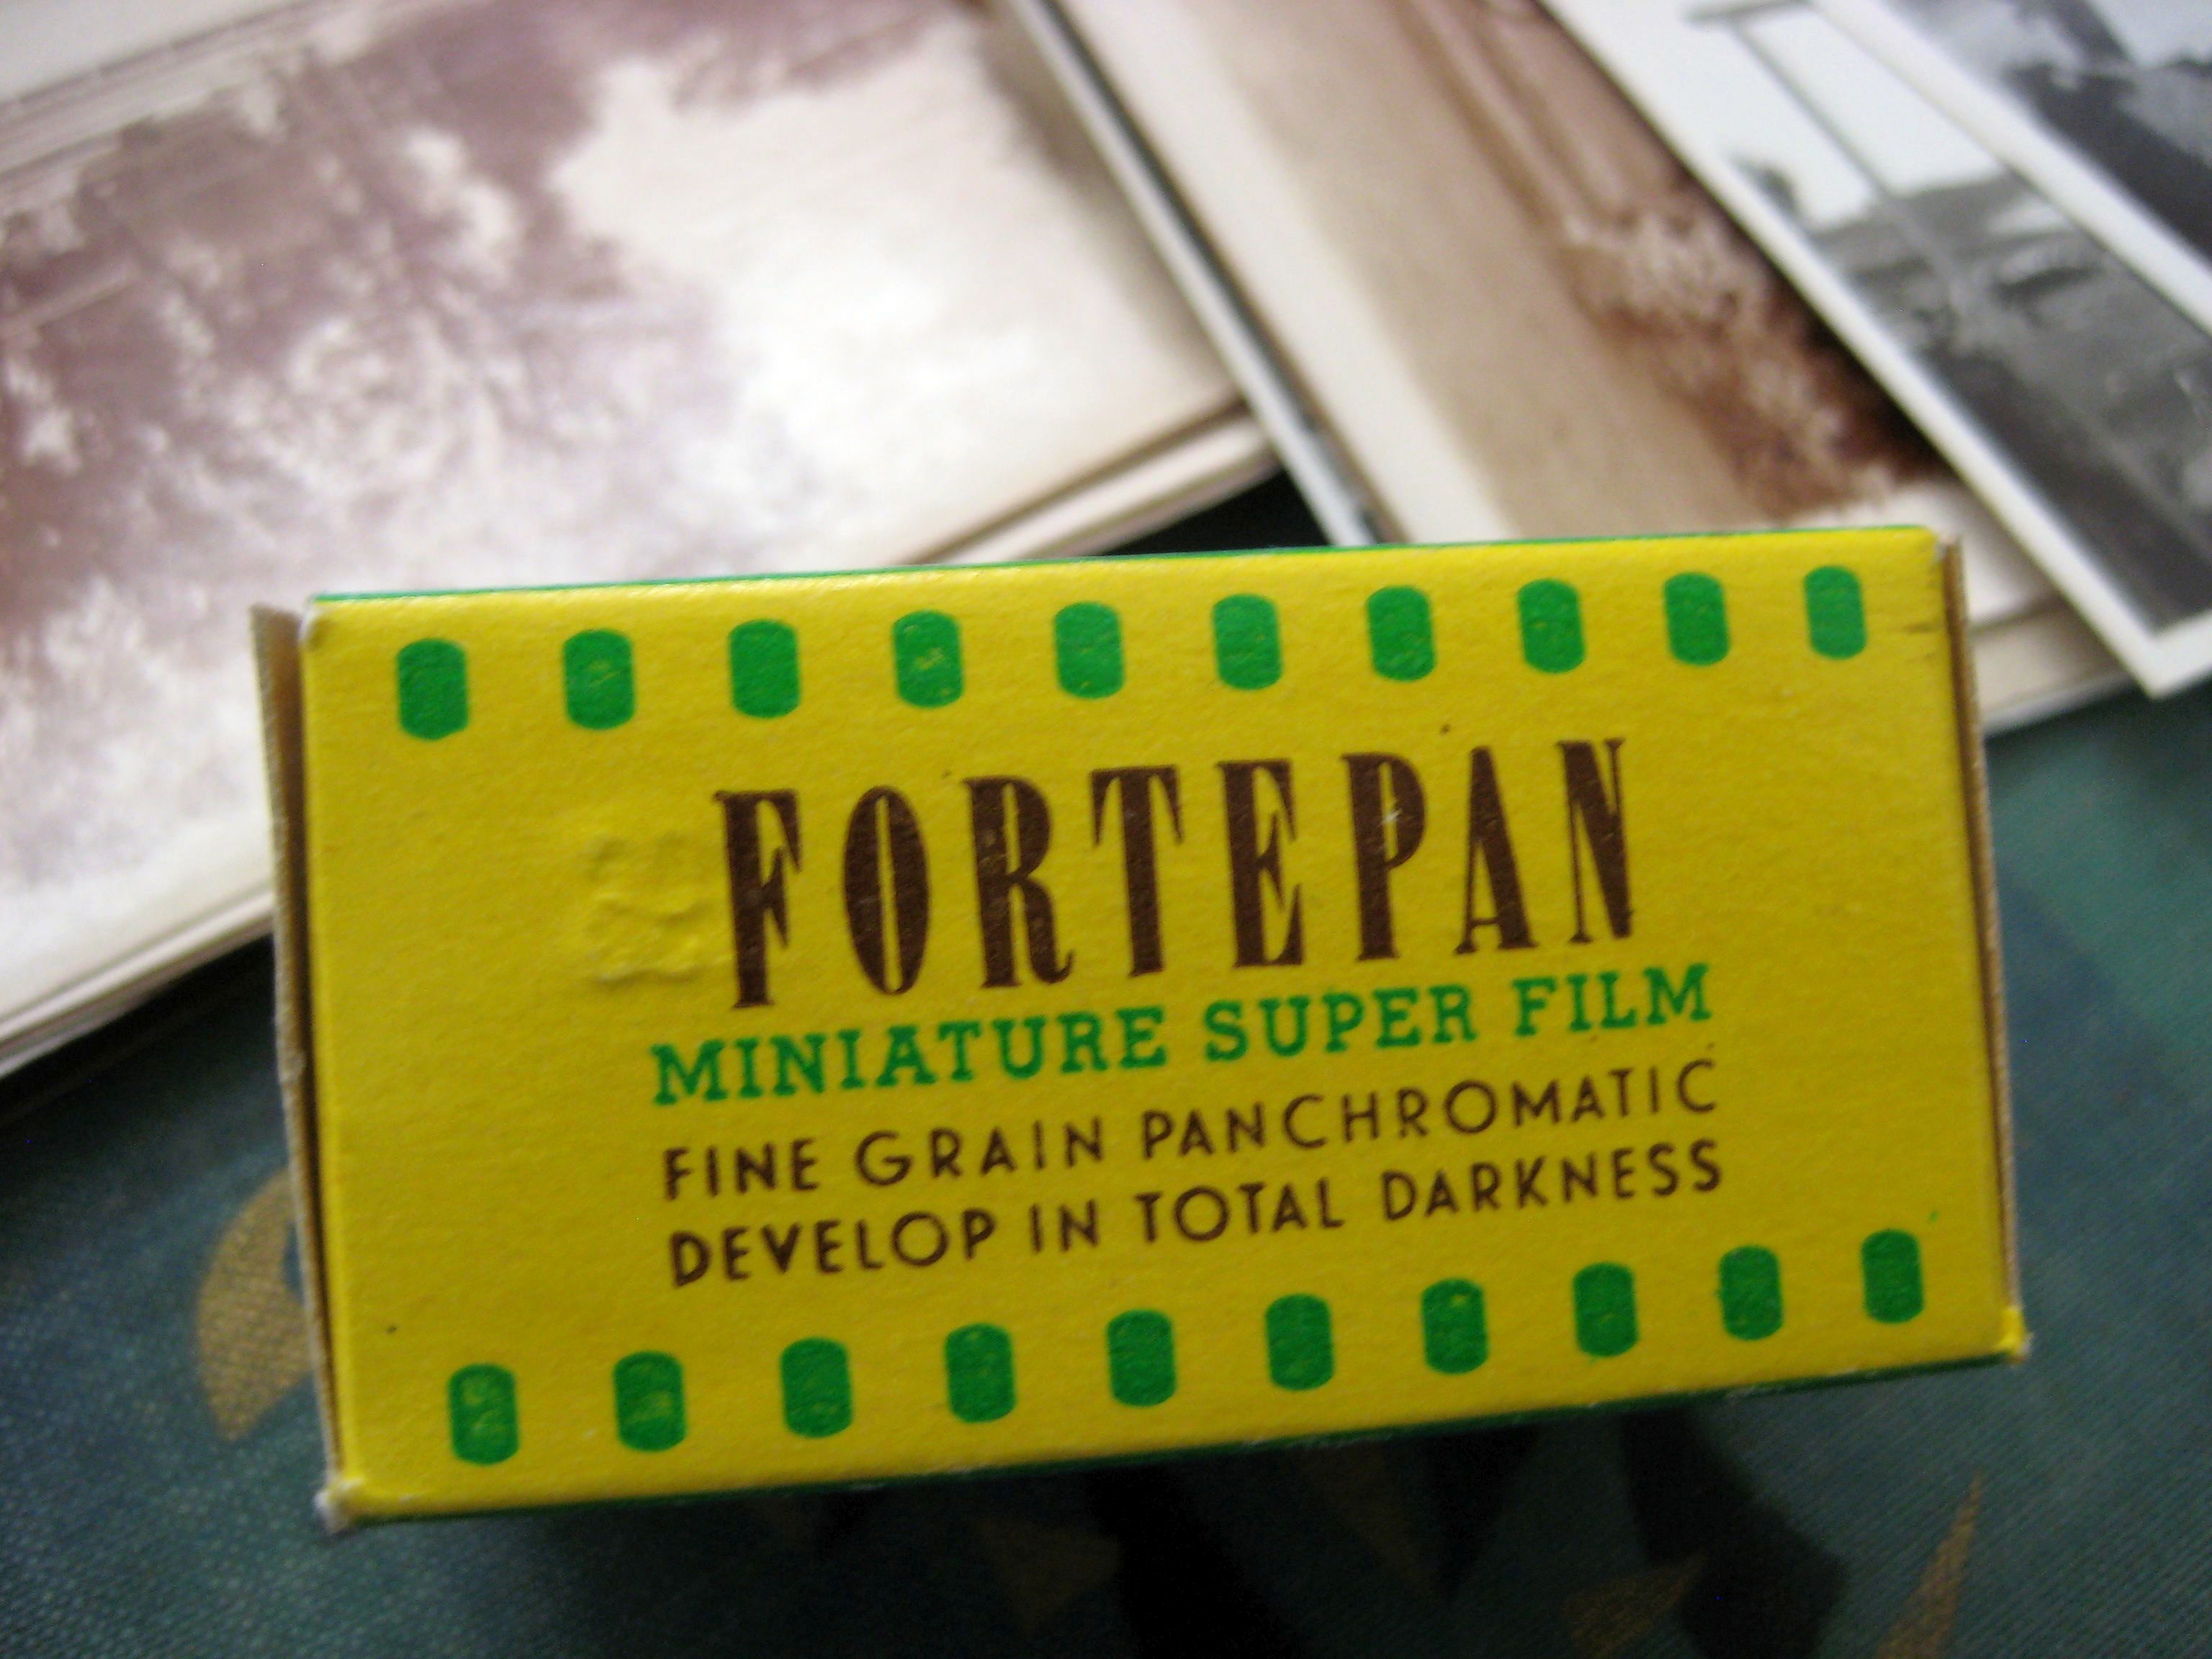 Fortepan film, product of Forte factory, photo by Tamás Scheibner